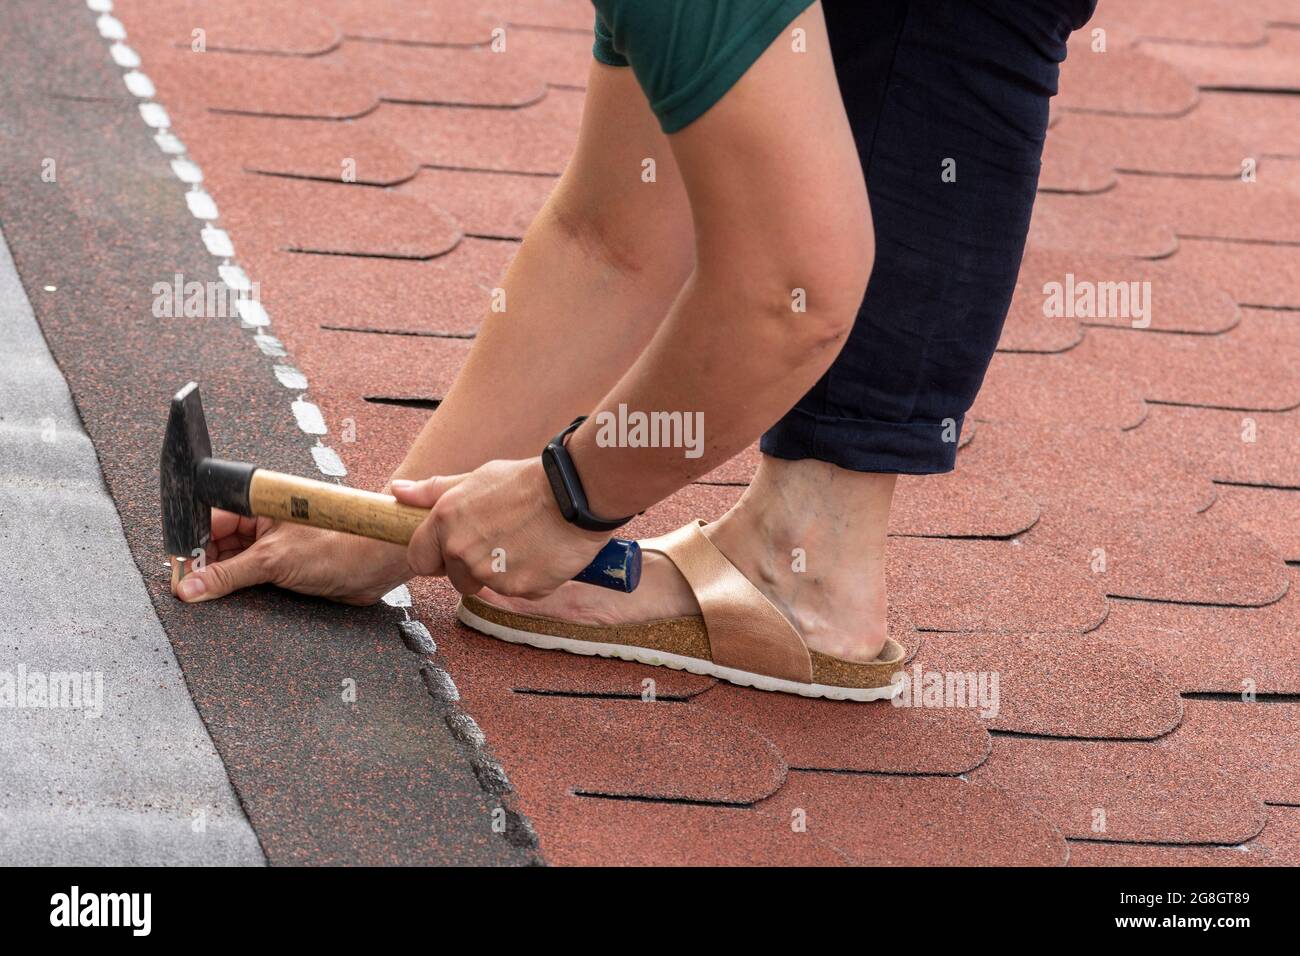 Woman laid of bitumen roof shingles. Disregard of occupational health and safety. Stock Photo